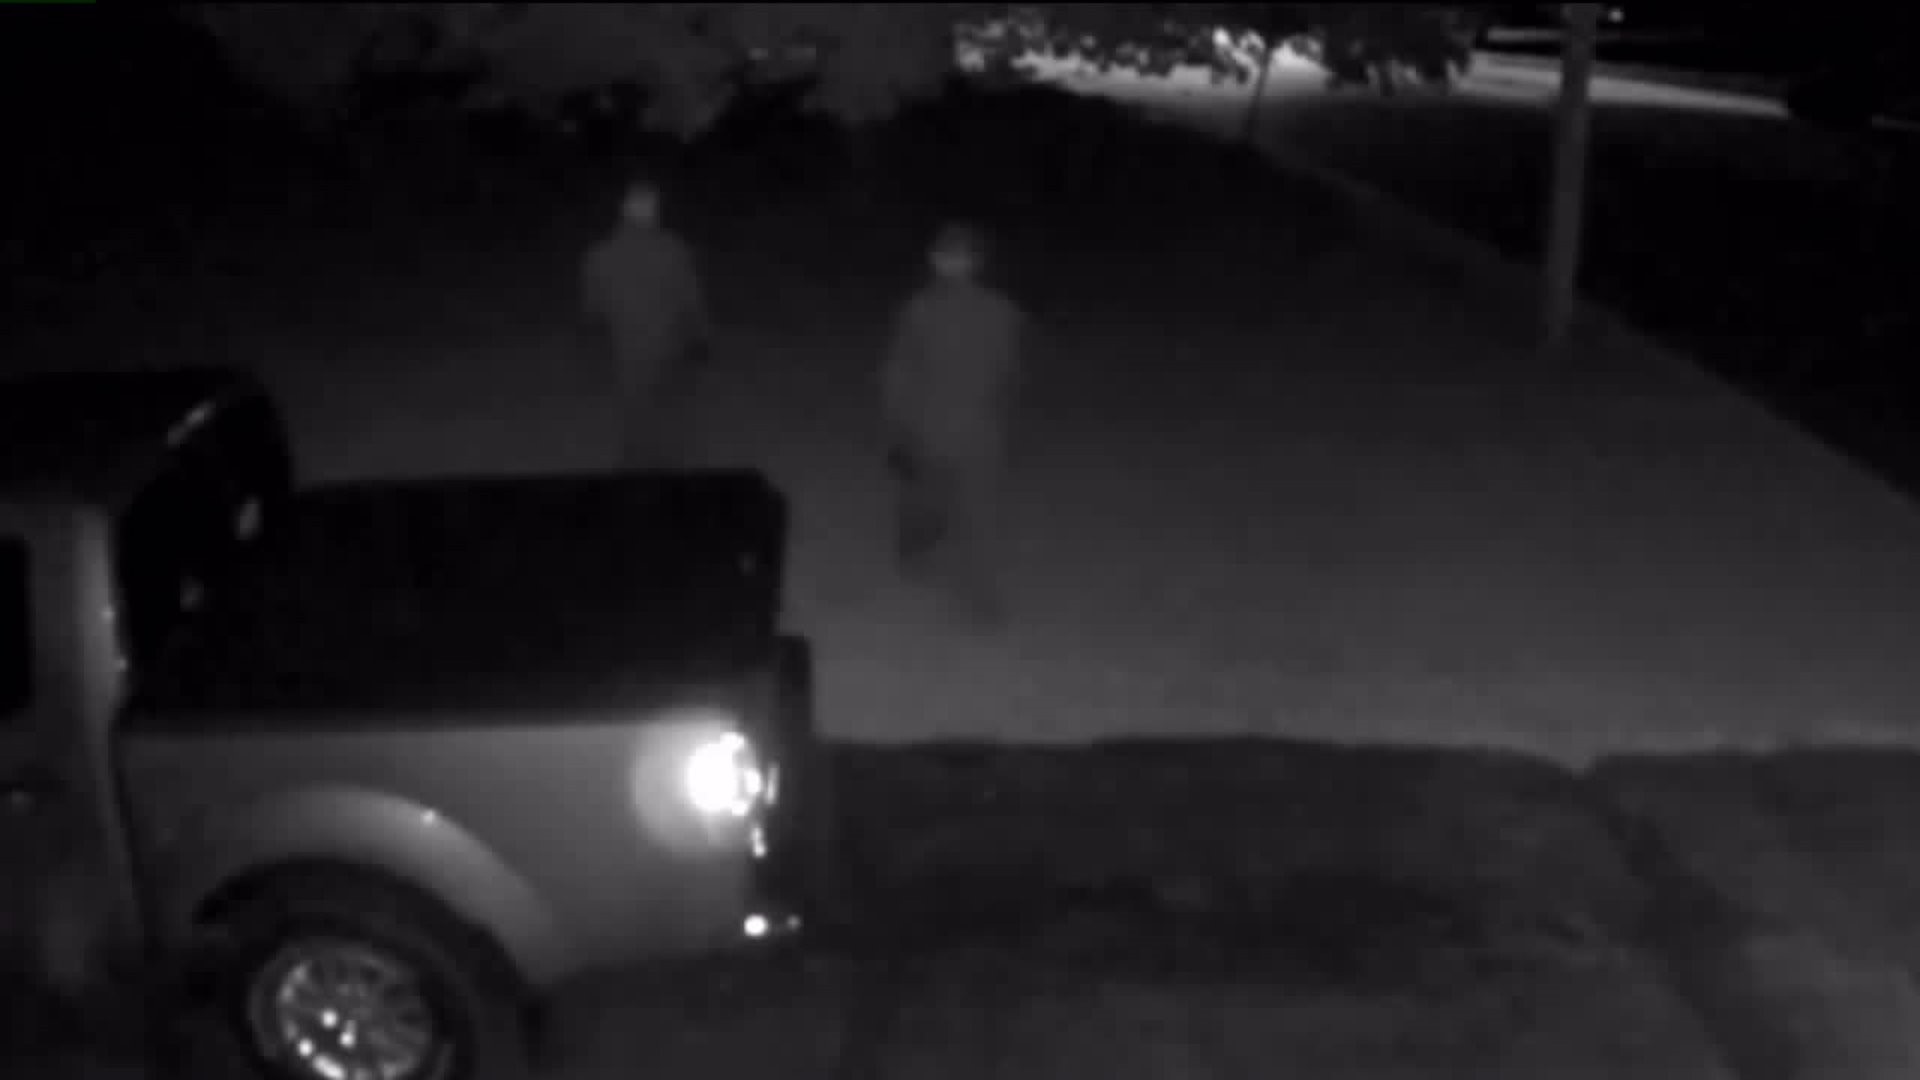 Police Searching for Suspects After Rash of Break-ins in Orwigsburg